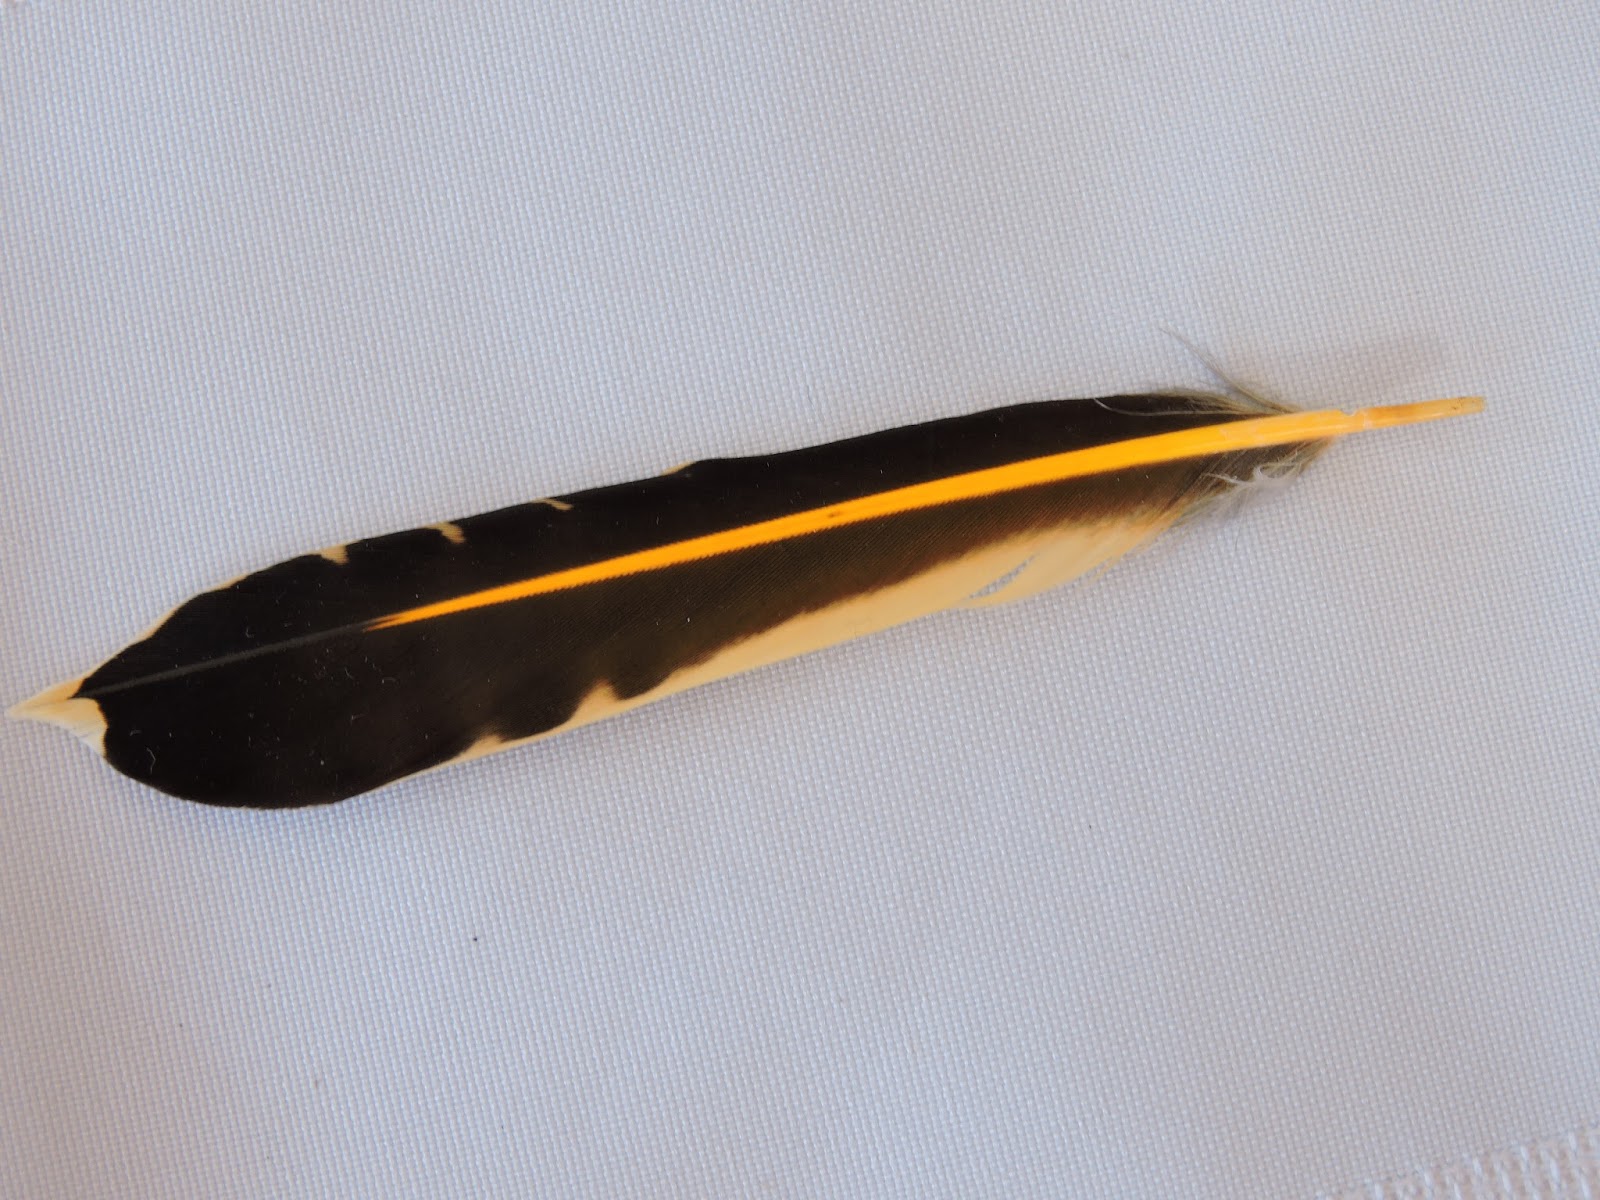 In Missouri, found this yellow feather with a black tip, probably 3 inches  or a little less long. Any idea what bird this belongs to? I can't find a  subreddit for this